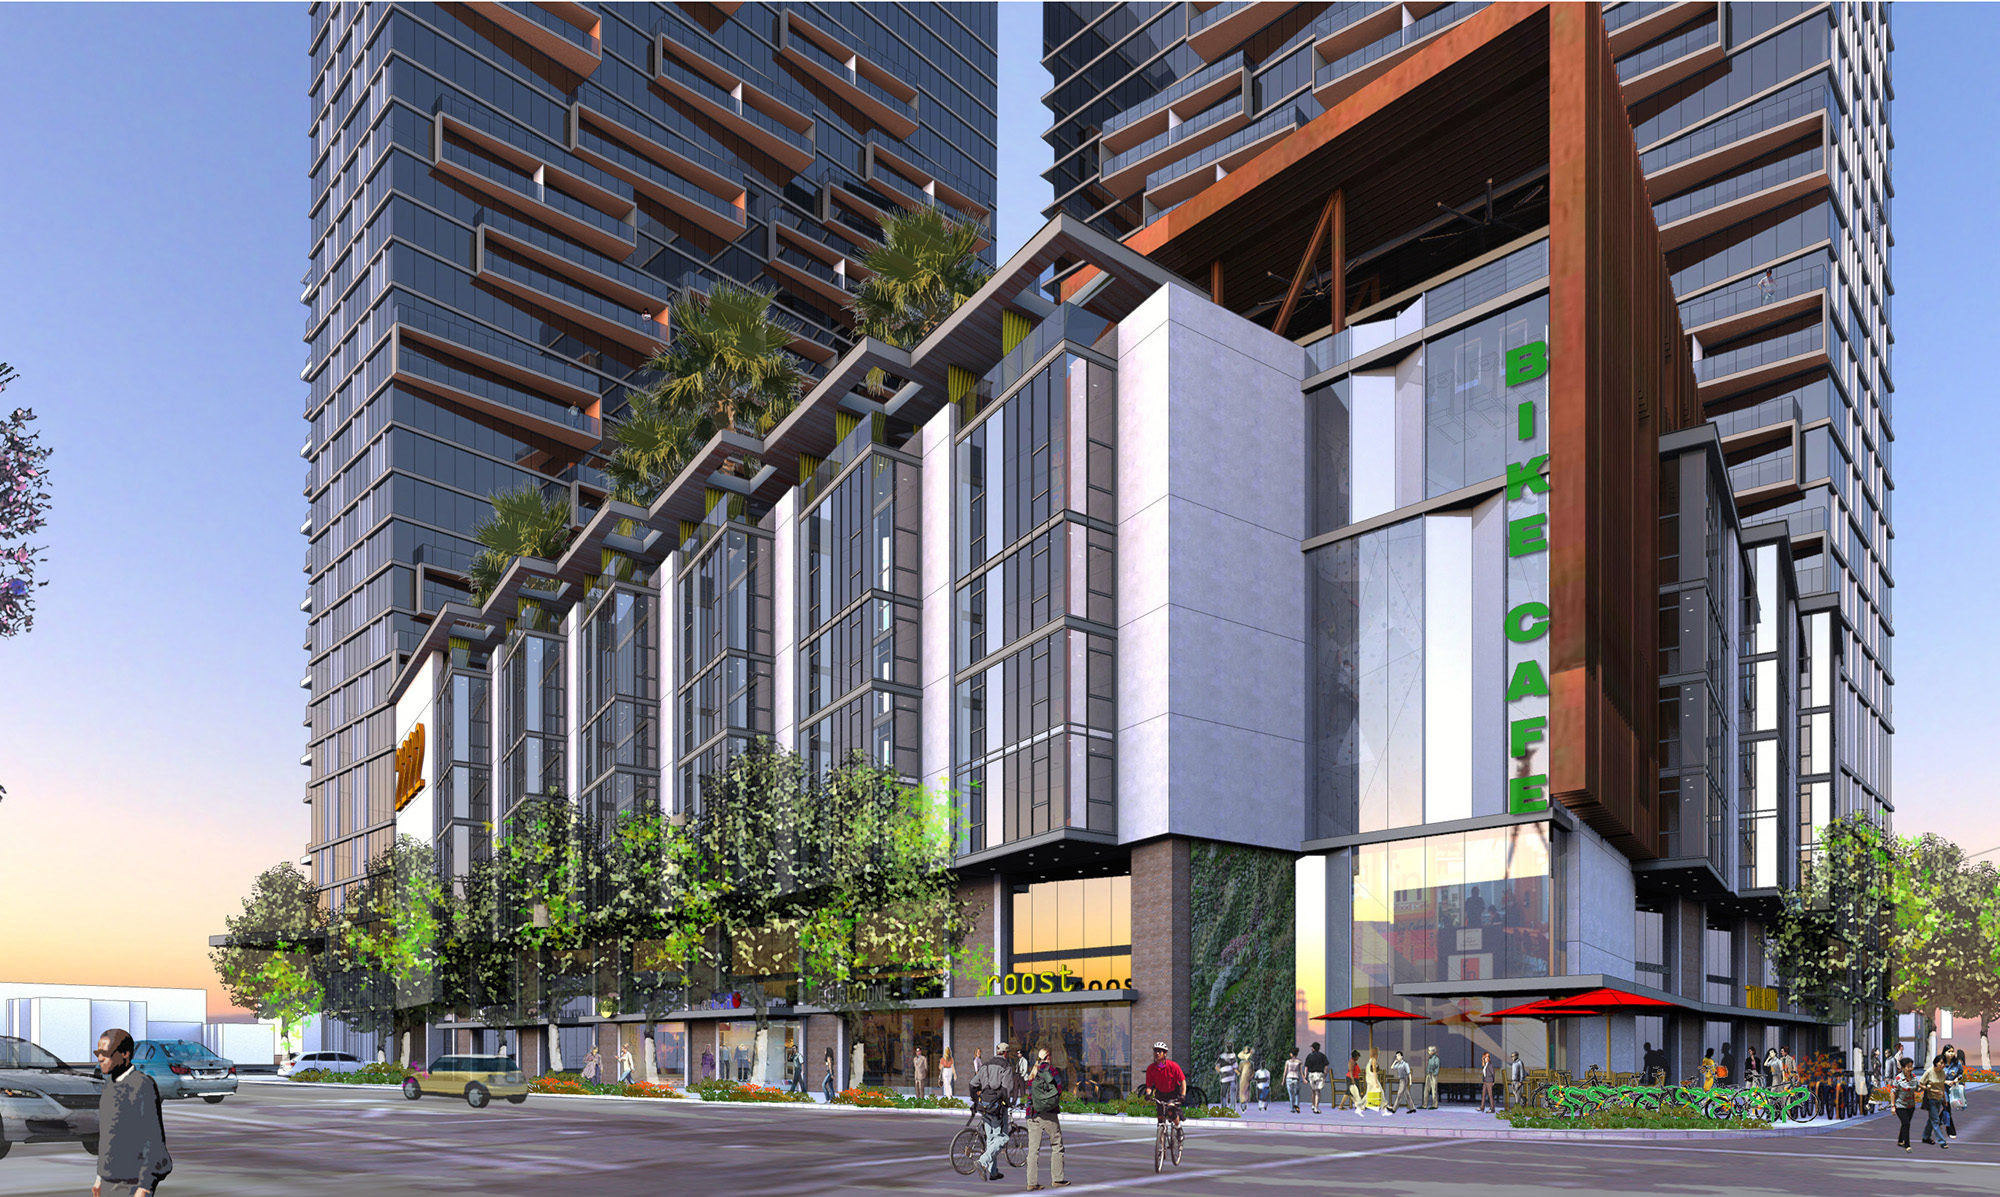 Rendering of high rise from street view at an upwards angle. Showing the retail and walkway spaces.